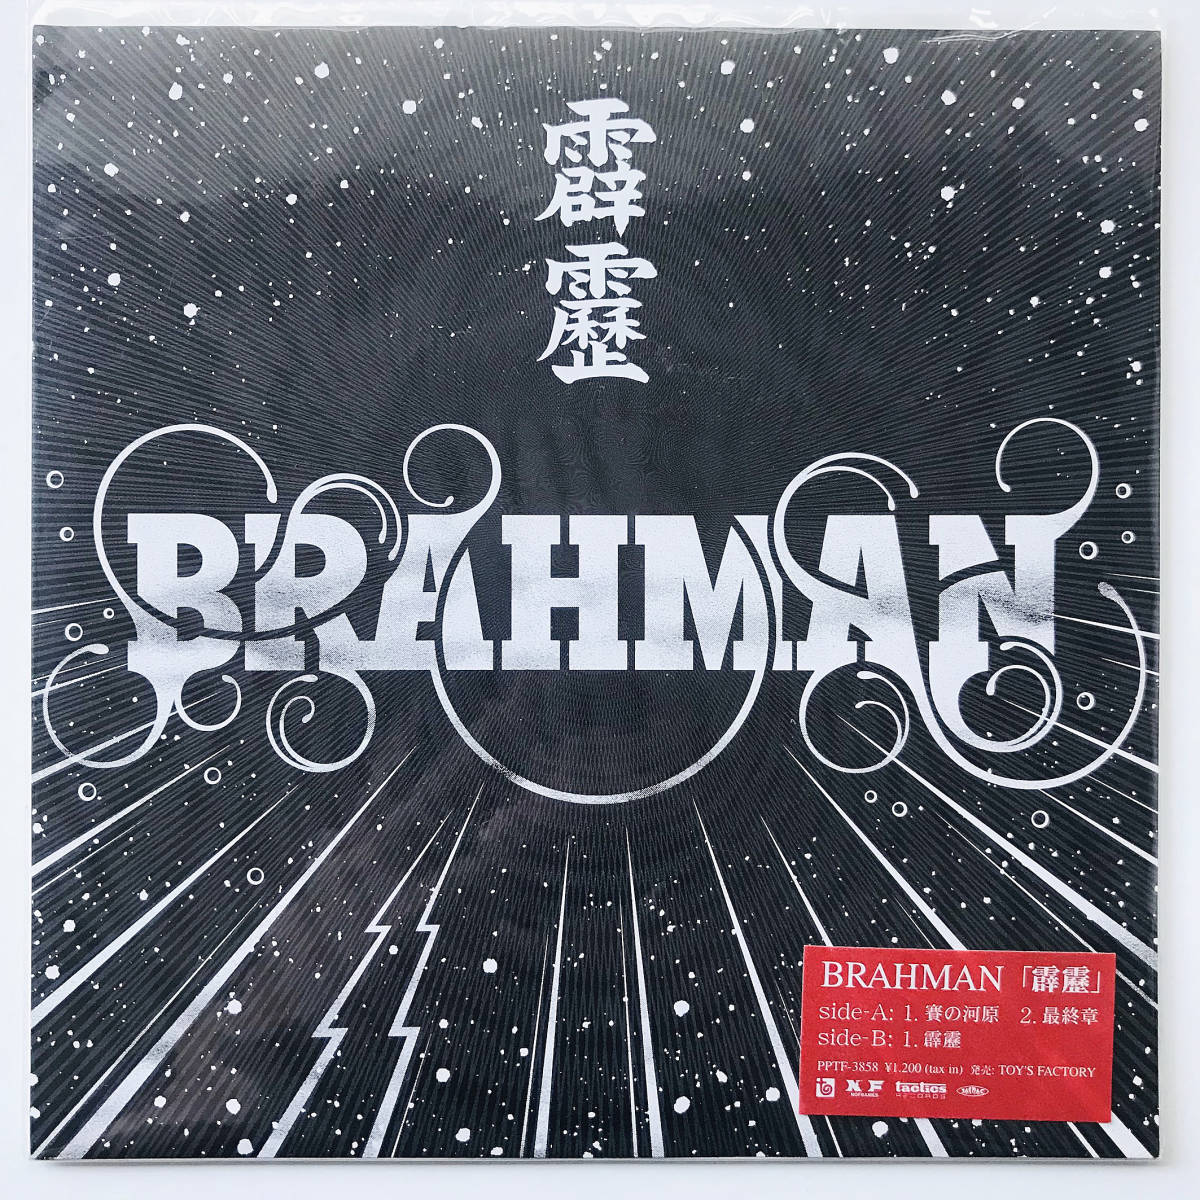  valuable 2011 year *7inch record *BRAHMAN(..)tosi low /TOSHI-LOW/ analogue record 